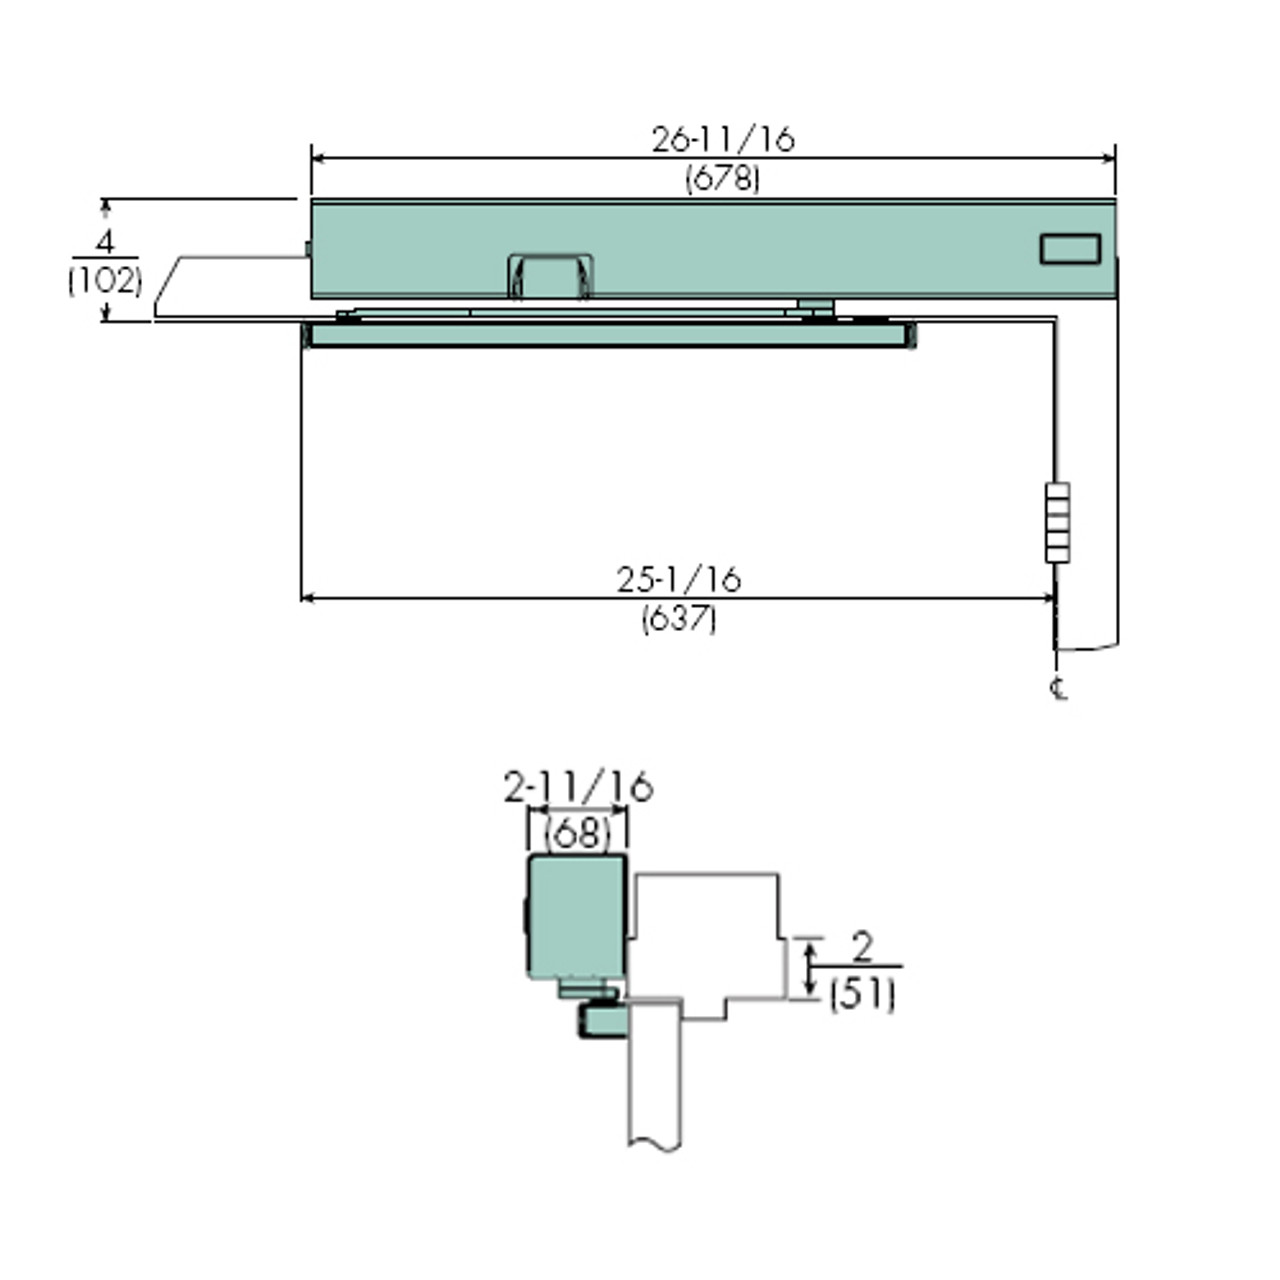 7114SZ-DZ-LH-120VAC-689 Norton 7100SZ Series Safe Zone Multi-Point Closer/Holder with Motion Sensor and Pull Side Rigid Arm and Slide Track in Aluminum Finish